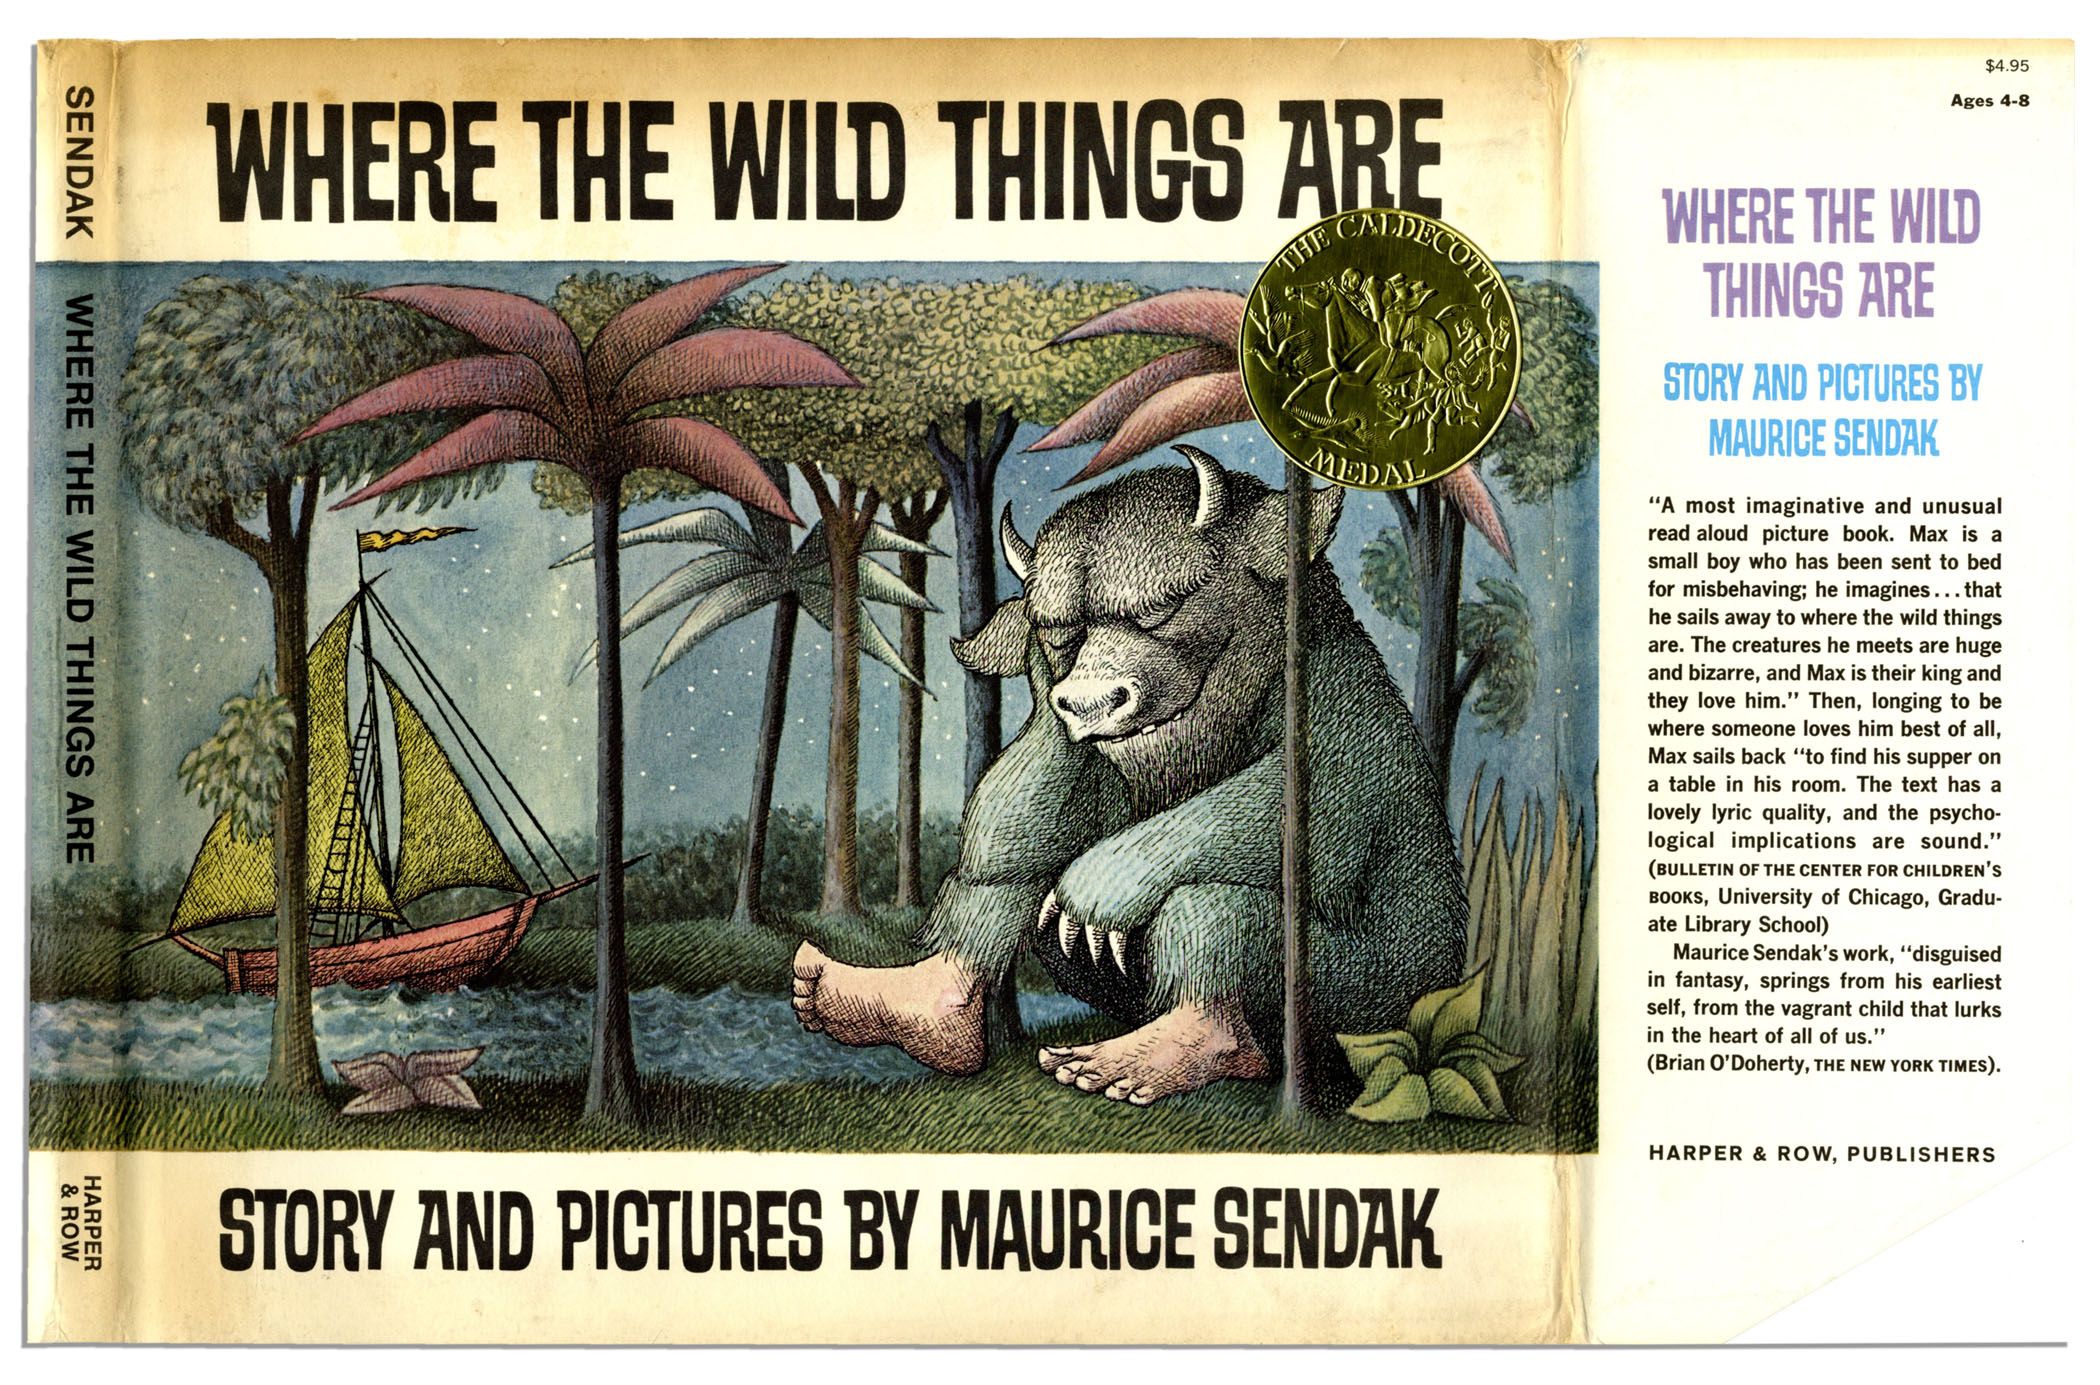 You use this book. Where the Wild things are книга. Where the Wild things are by Maurice Sendak. Там, где живут чудовища Морис Сендак книга. Where the Wild things are альбом.